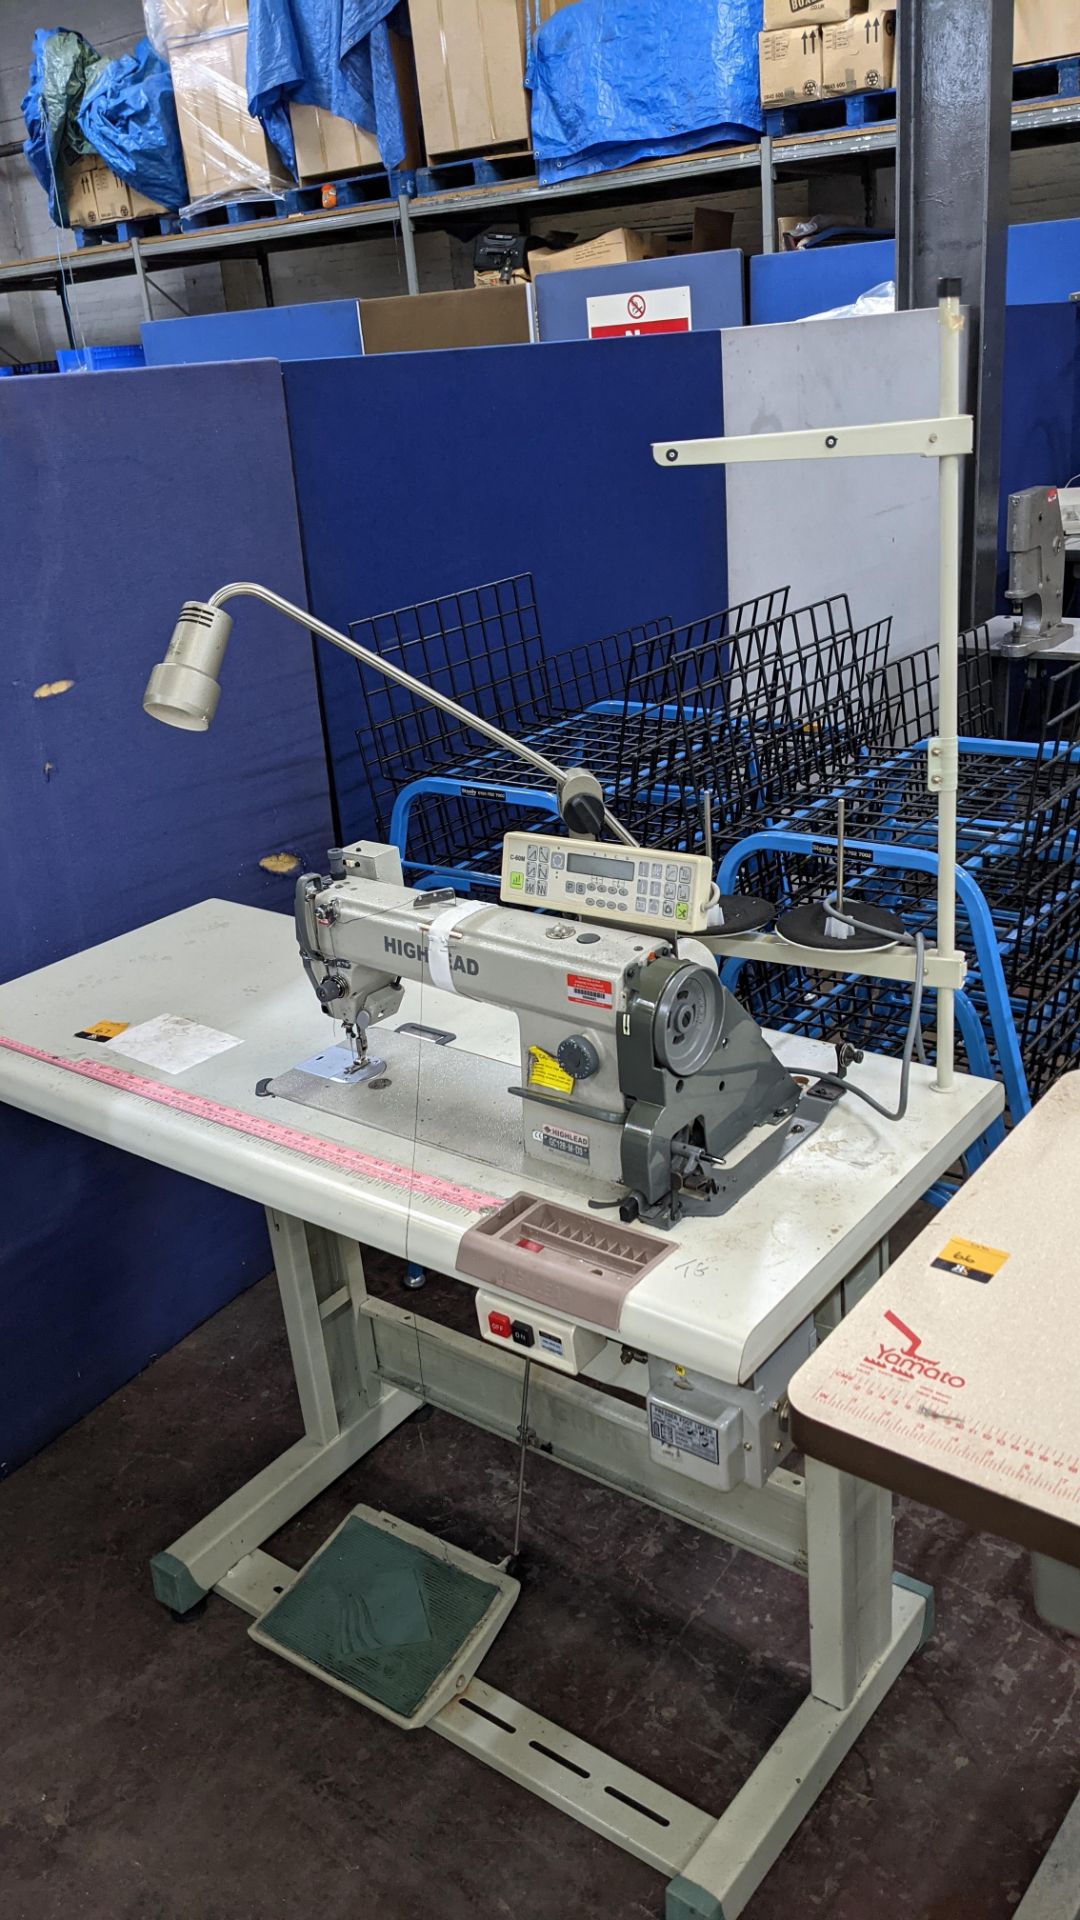 Highlead model GC128-M-D3 sewing machine with model C-60M digital controller - Image 3 of 18